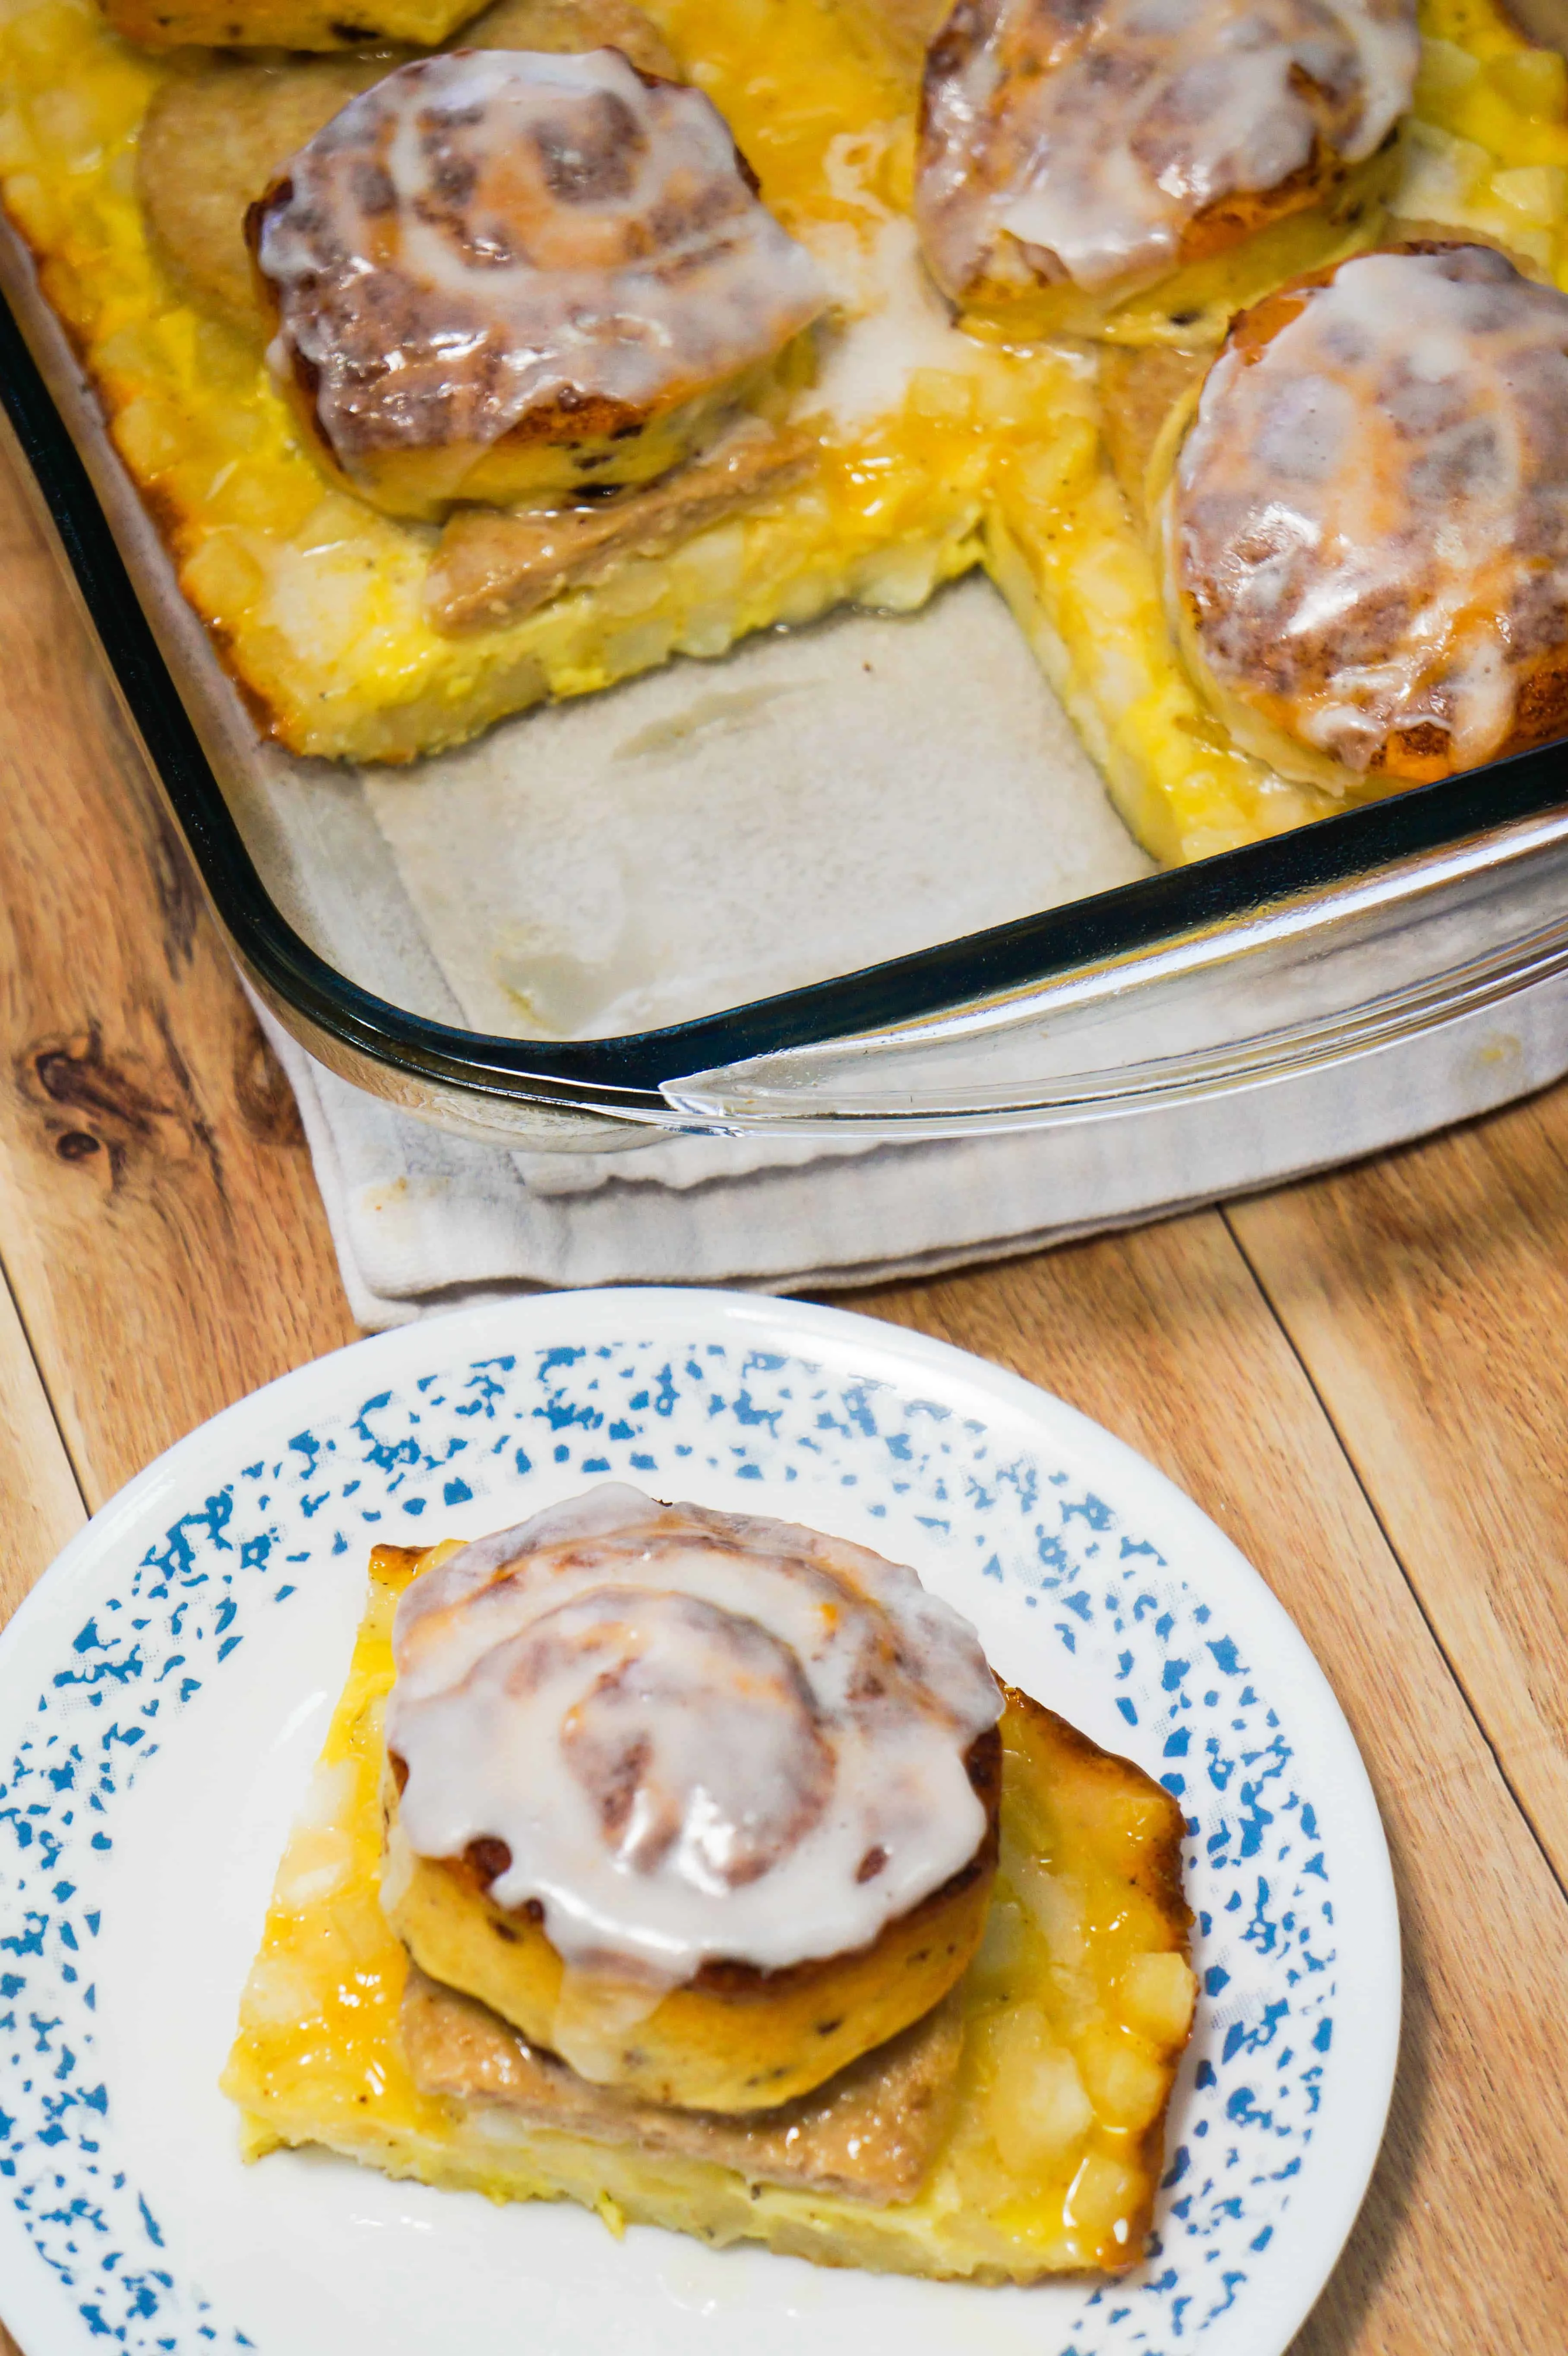 Cinnamon roll breakfast casserole recipe loaded with hash browns, eggs and sausage.